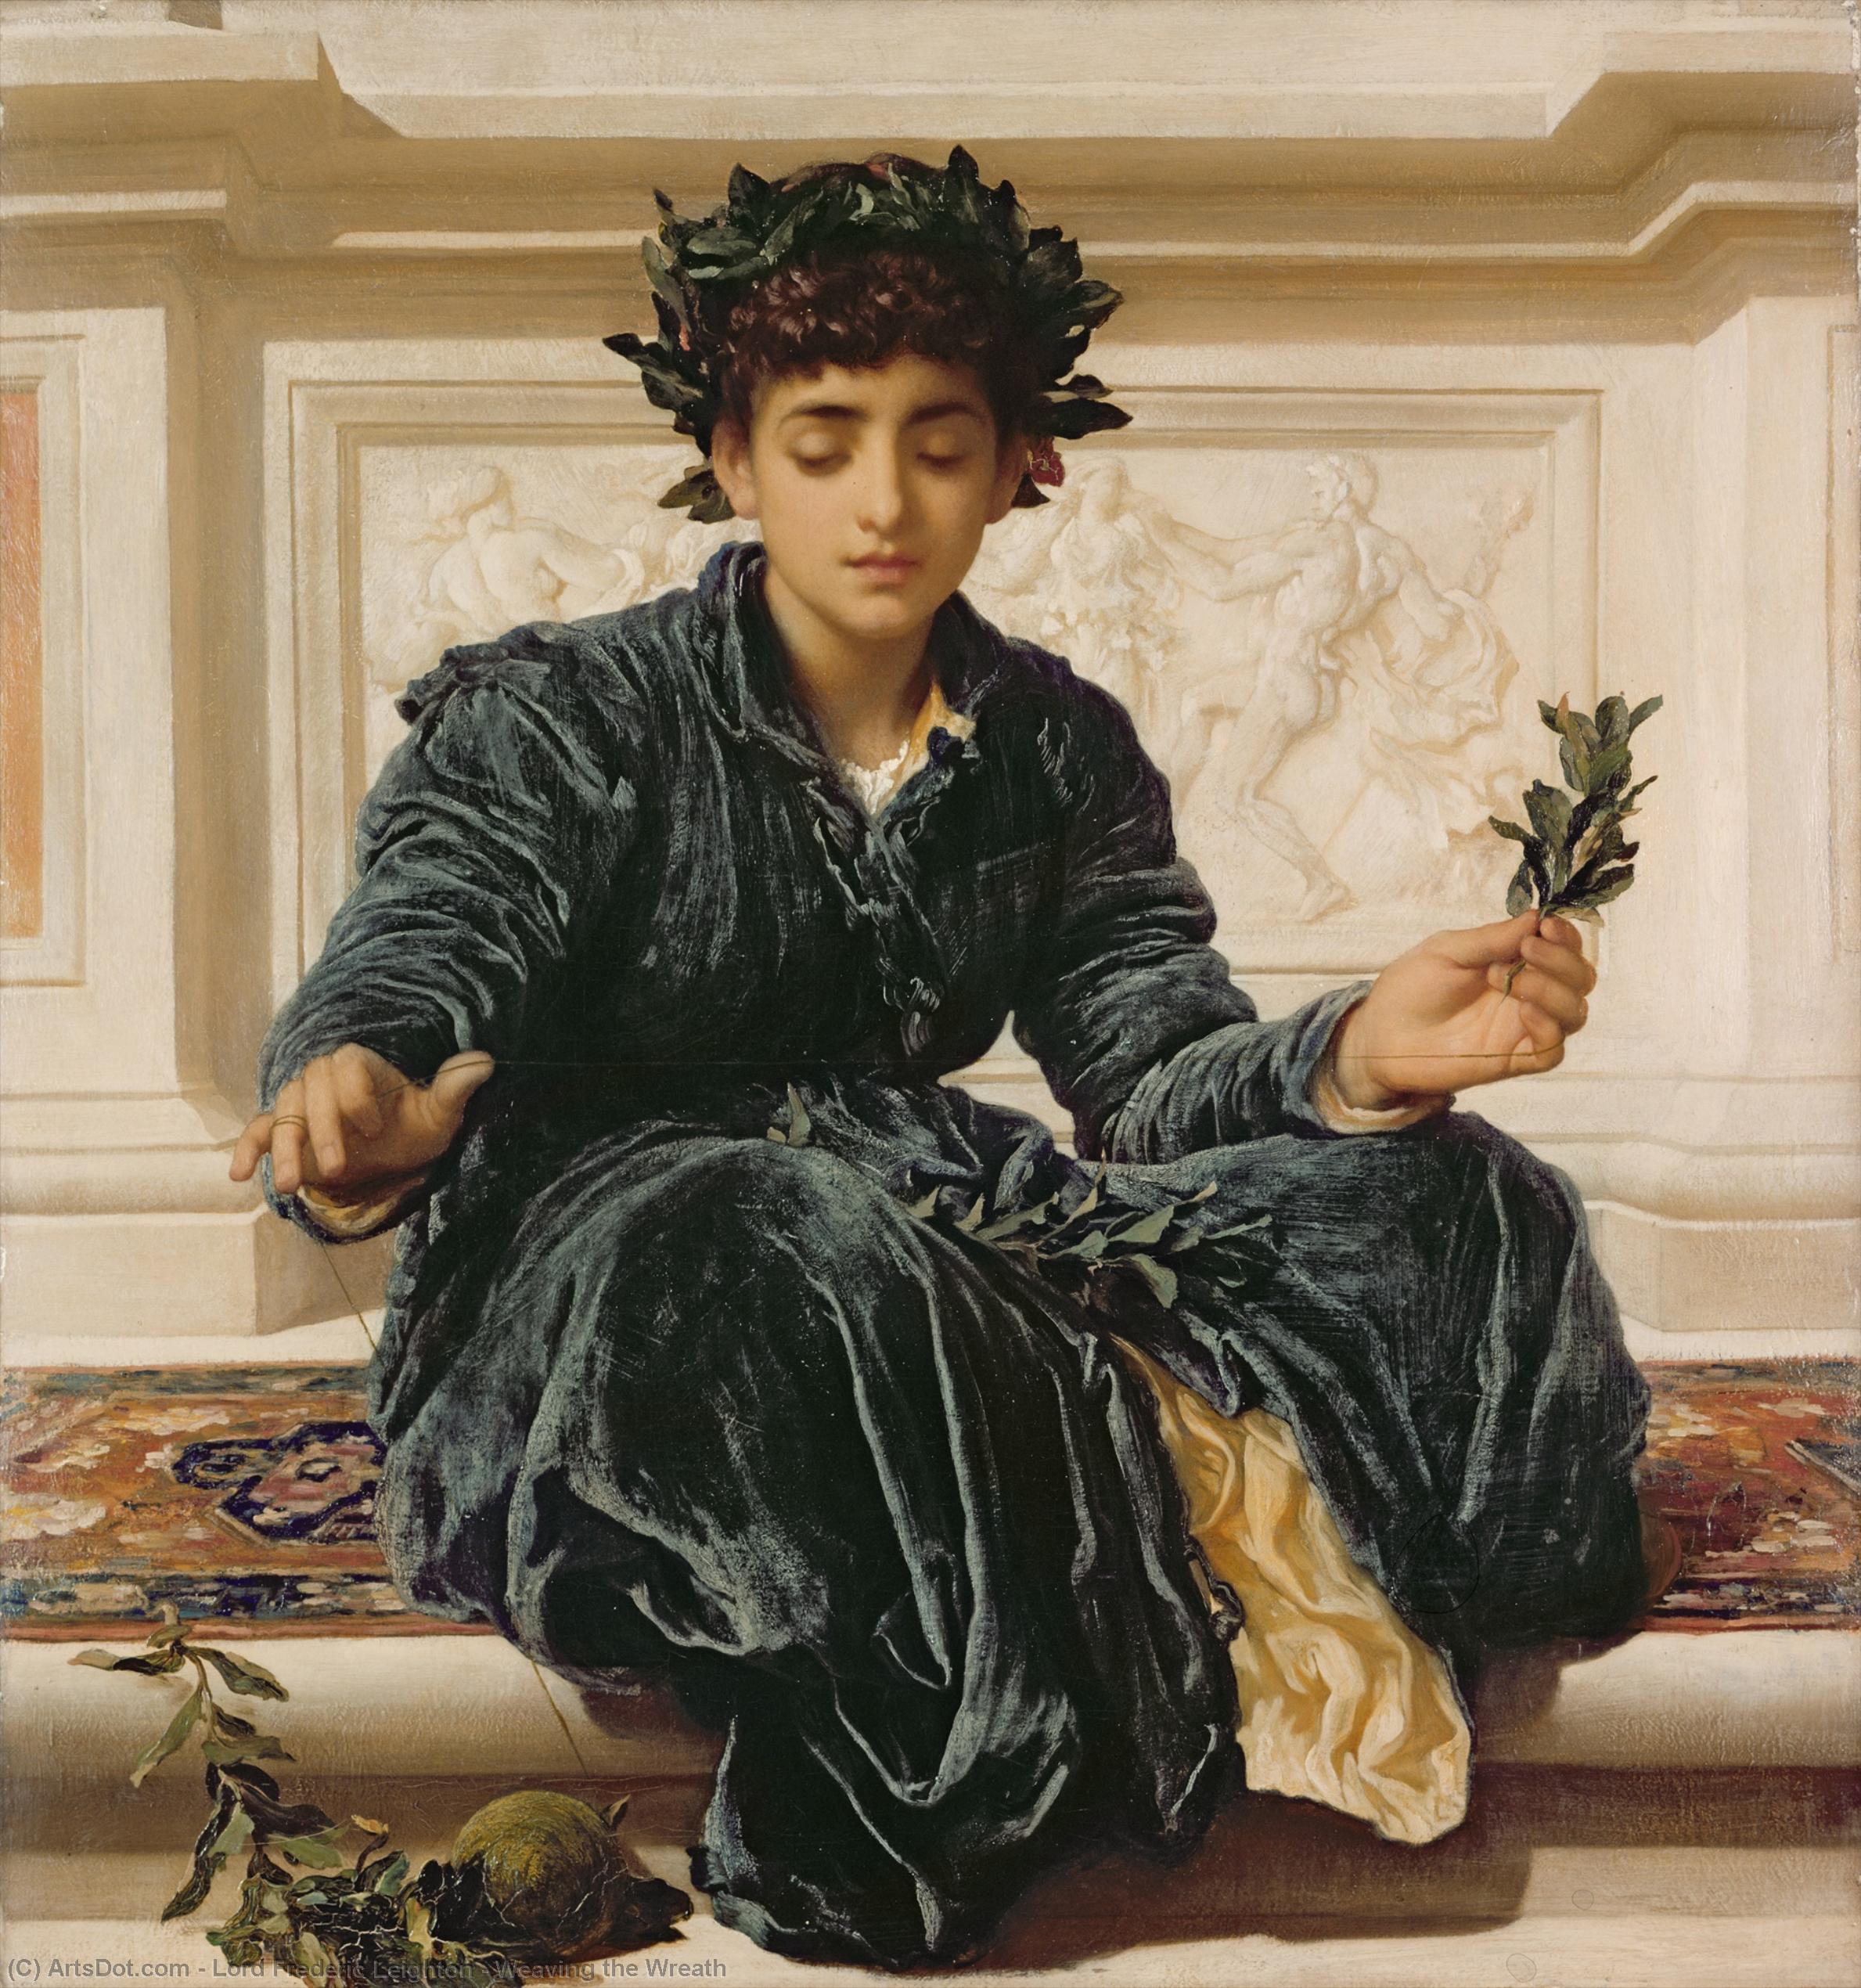 Buy Museum Art Reproductions Weaving the Wreath, 1872 by Lord Frederic Leighton | ArtsDot.com